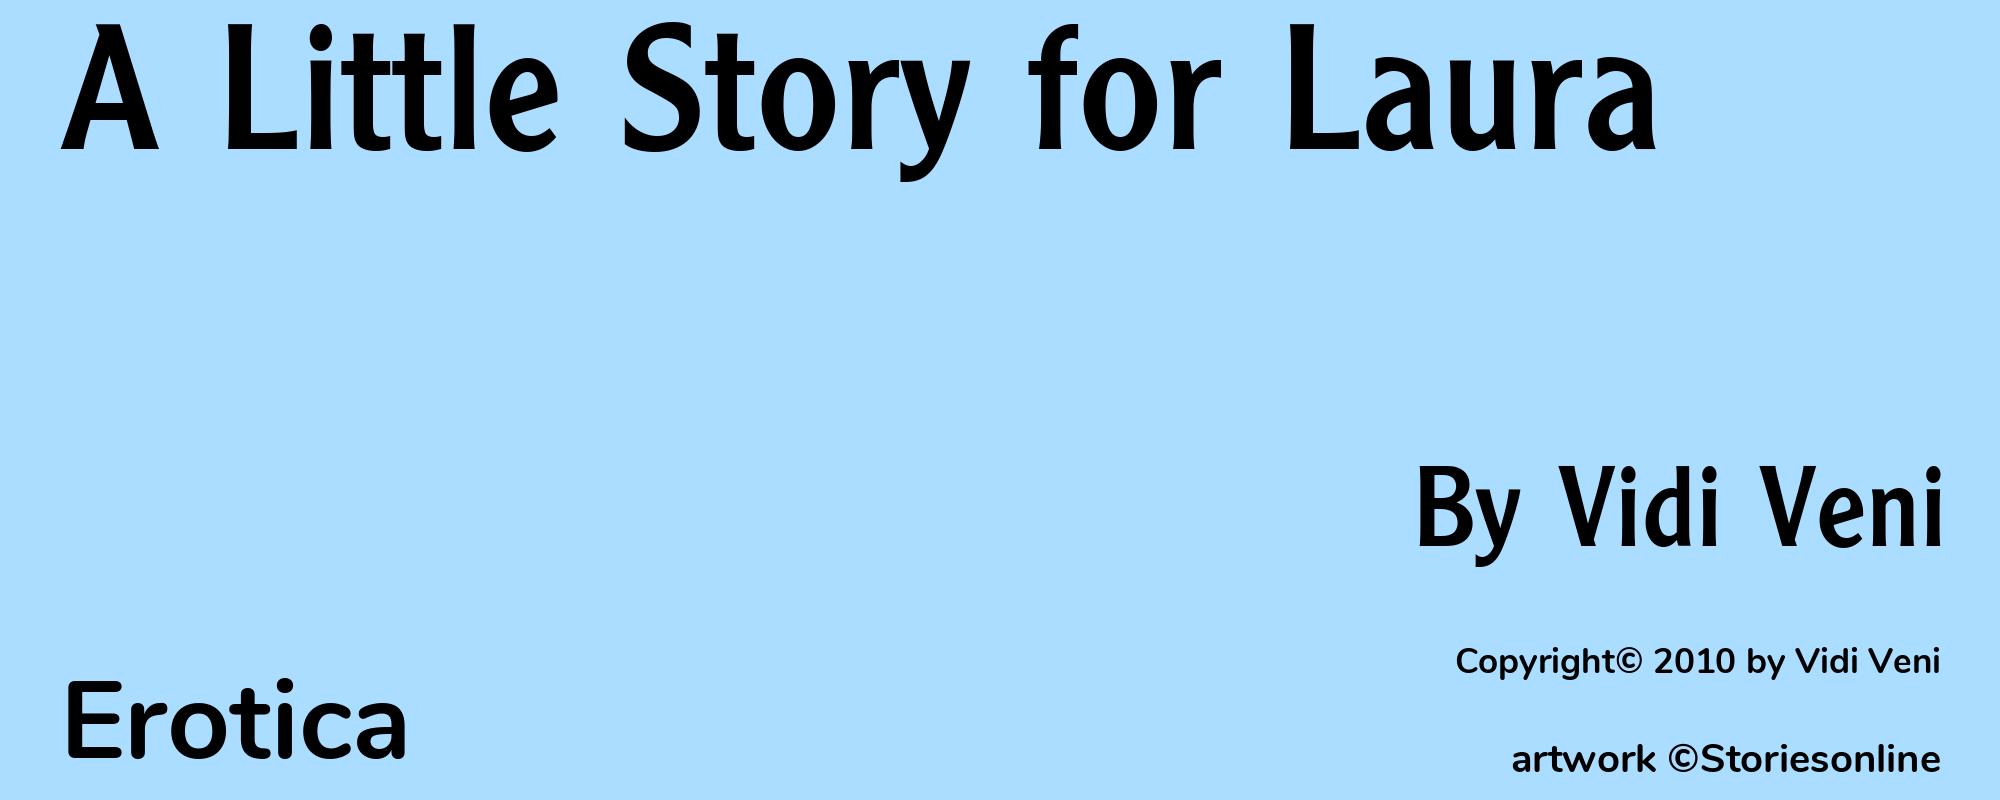 A Little Story for Laura - Cover